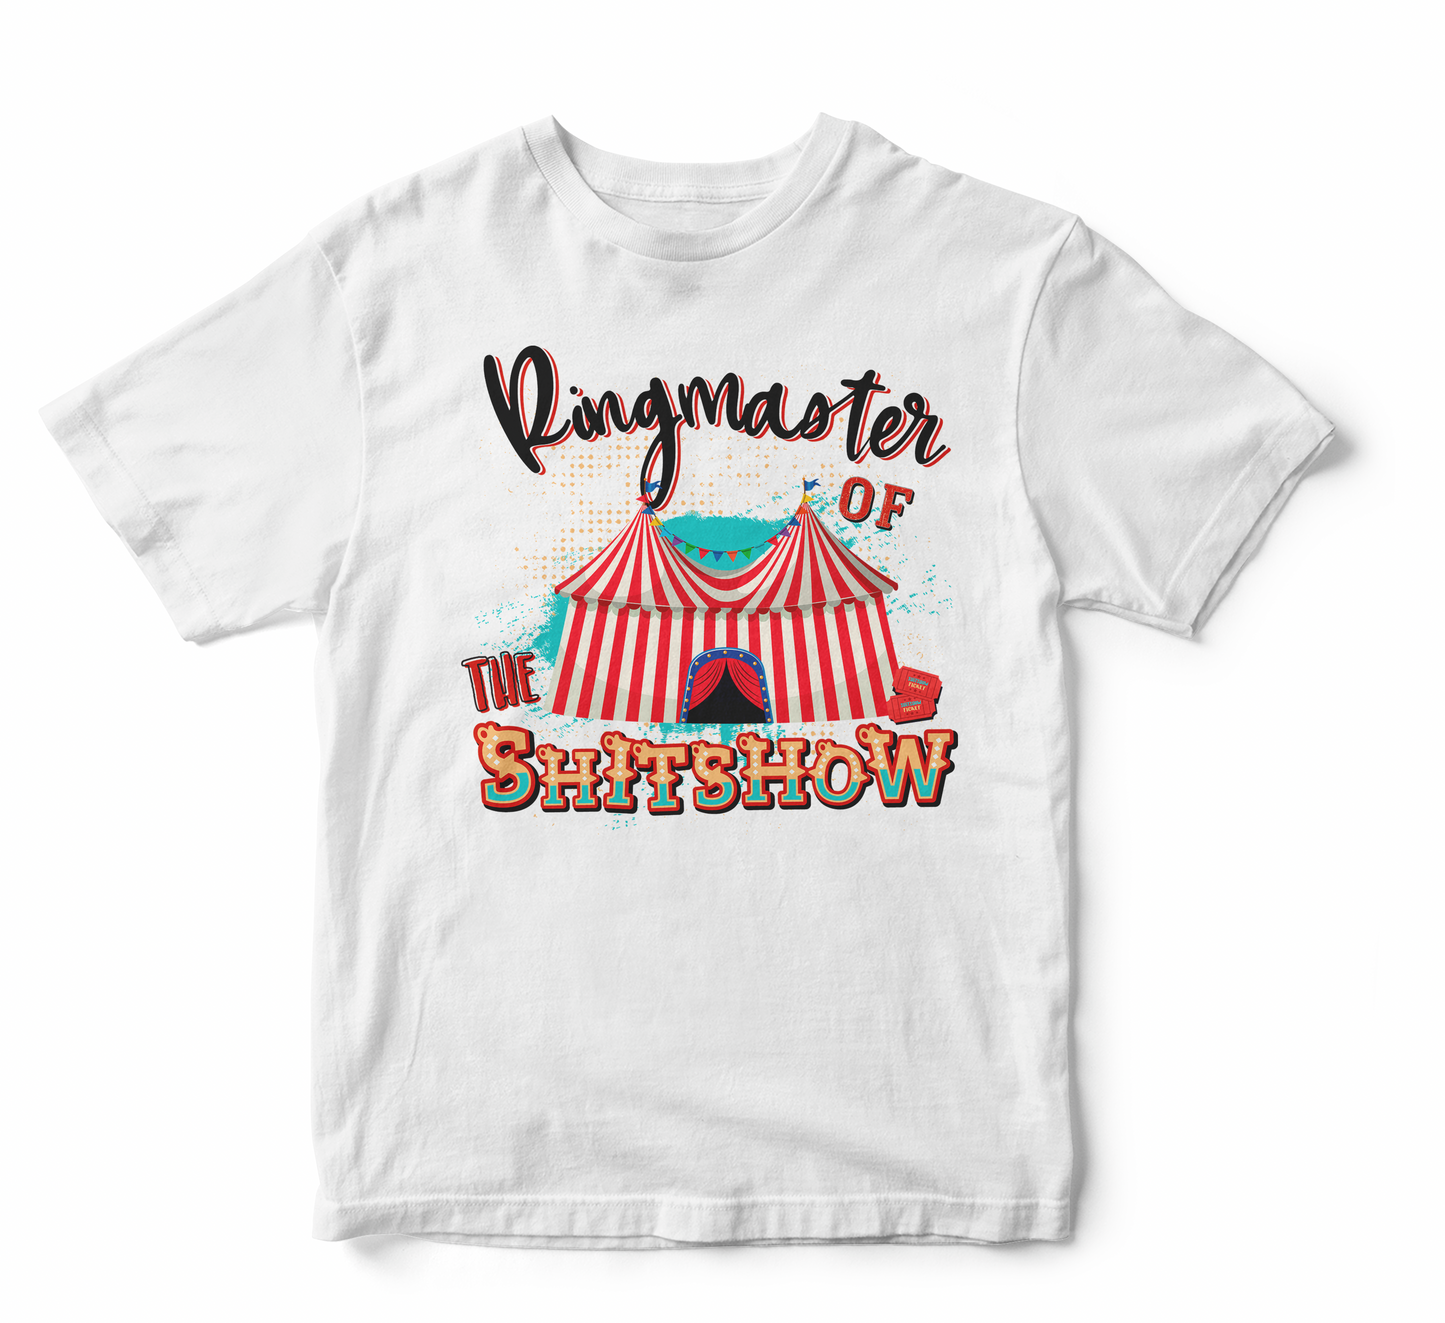 RingMaster of the Show T-Shirt